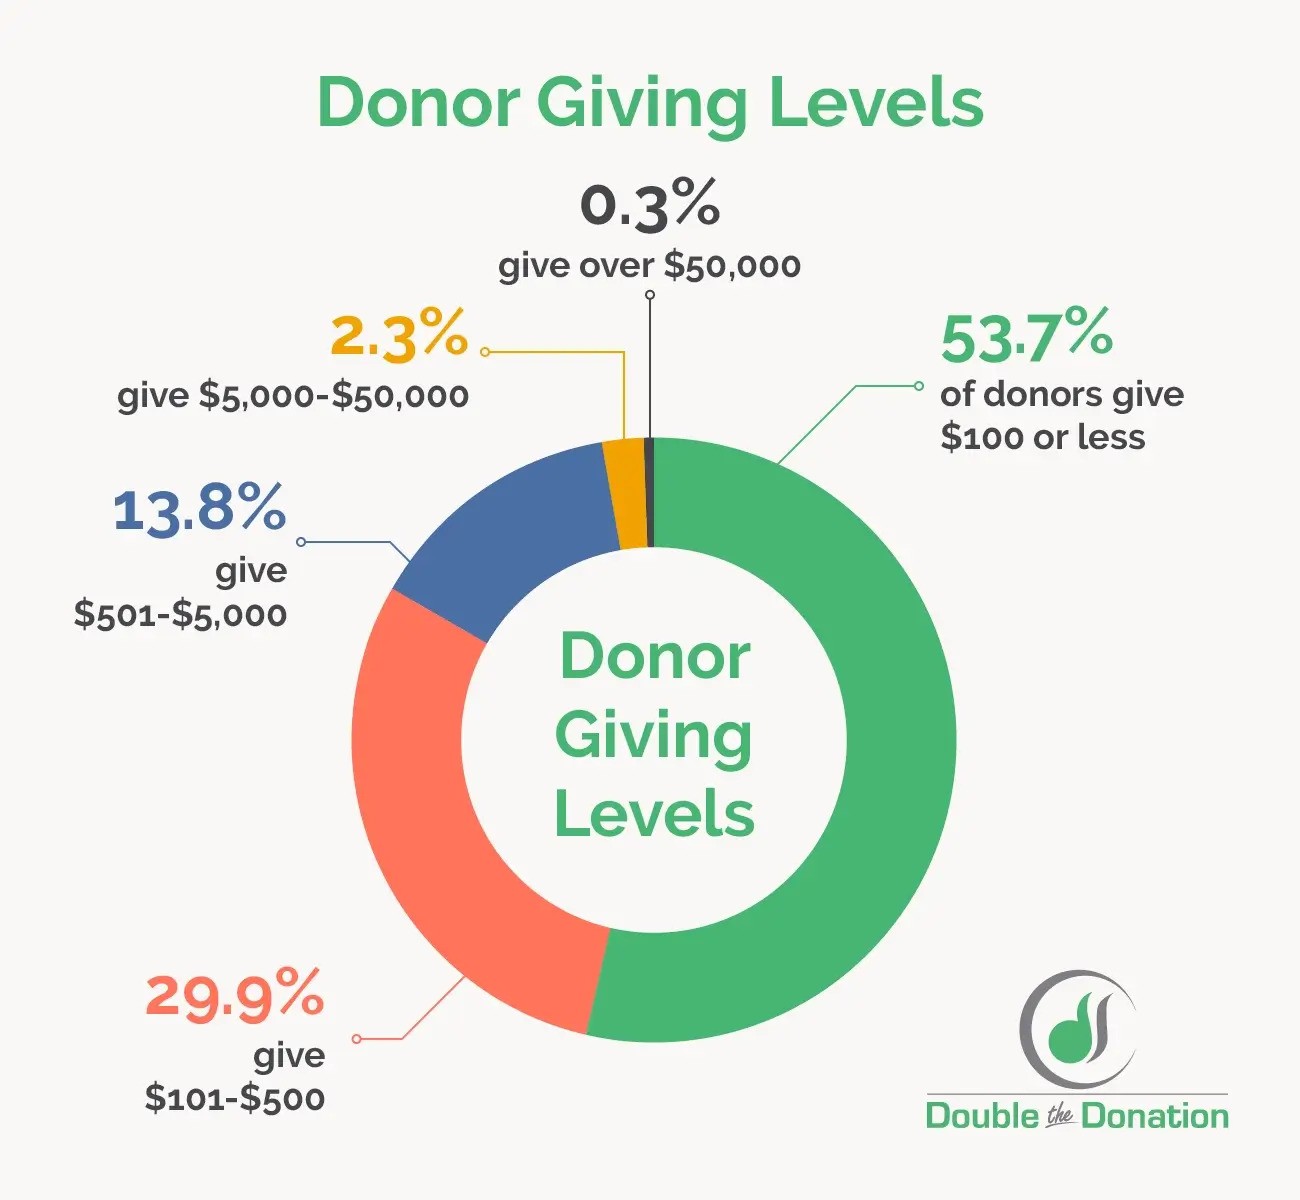 A pie chart showing how many donors, on average, give certain donation amounts, which are detailed in the text below.